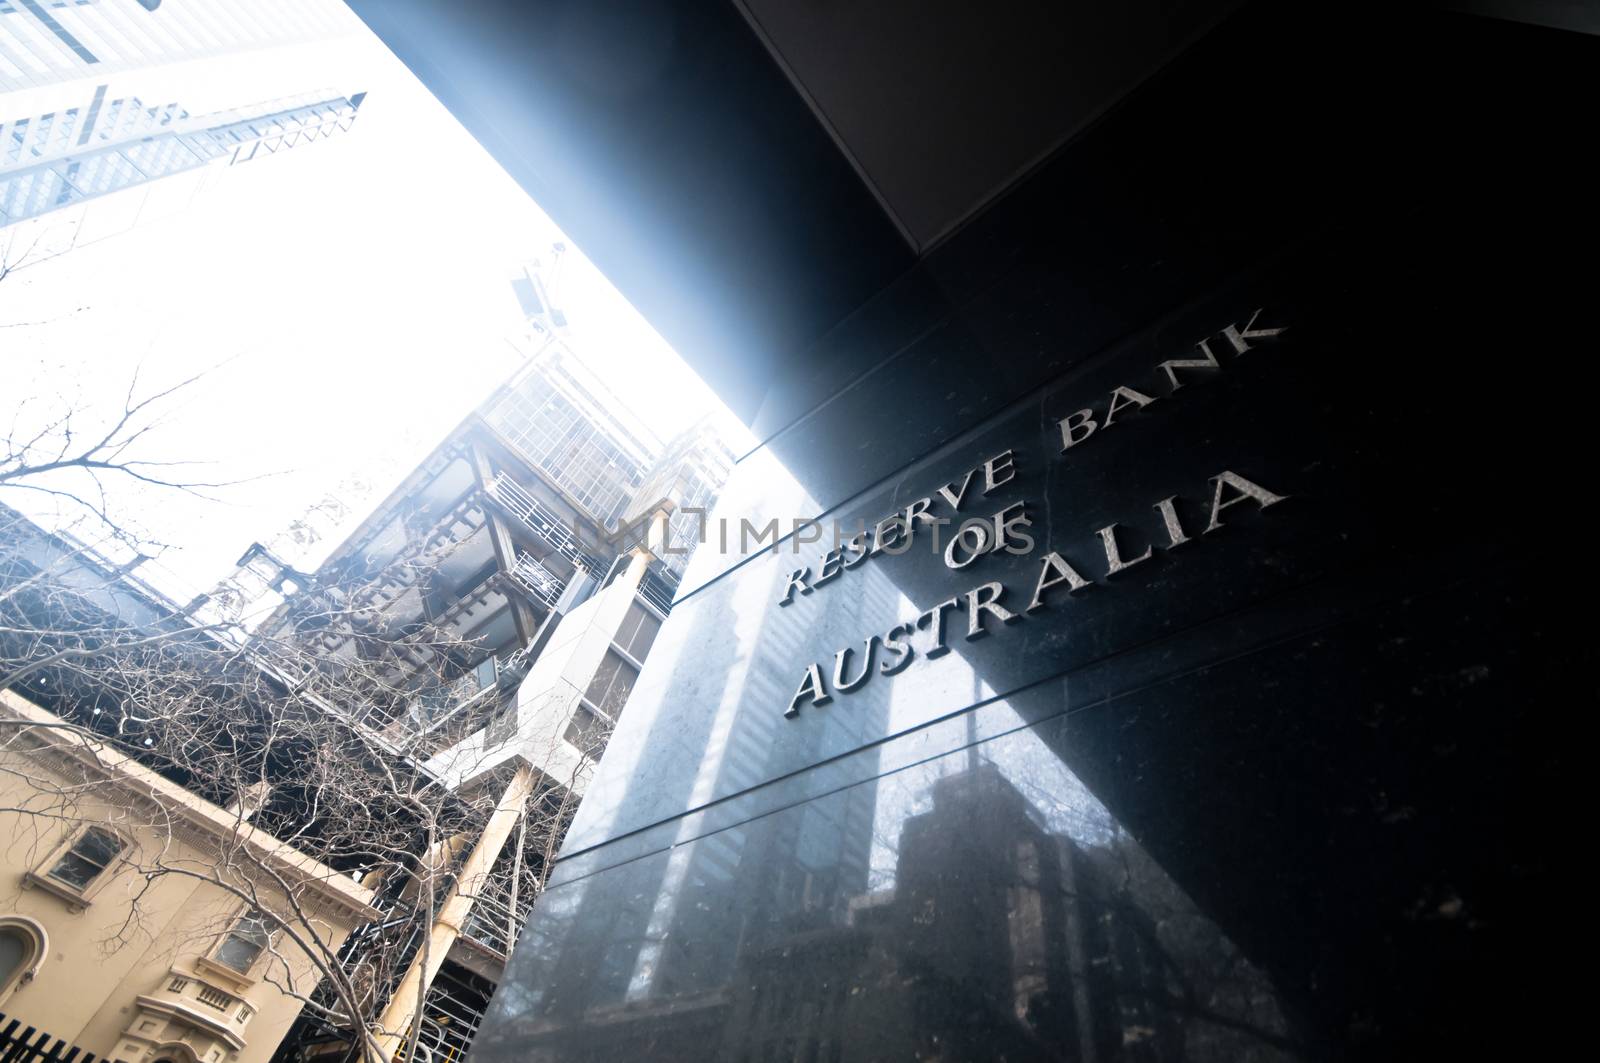 MELBOURNE, AUSTRALIA - JULY 26, 2018: Reserve Bank of Australia name on black granite wall in Melbourne Australia with a reflection of high-rise buildings. The RBA building is located at 60 Collins St, Melbourne VIC 3000 Australia.